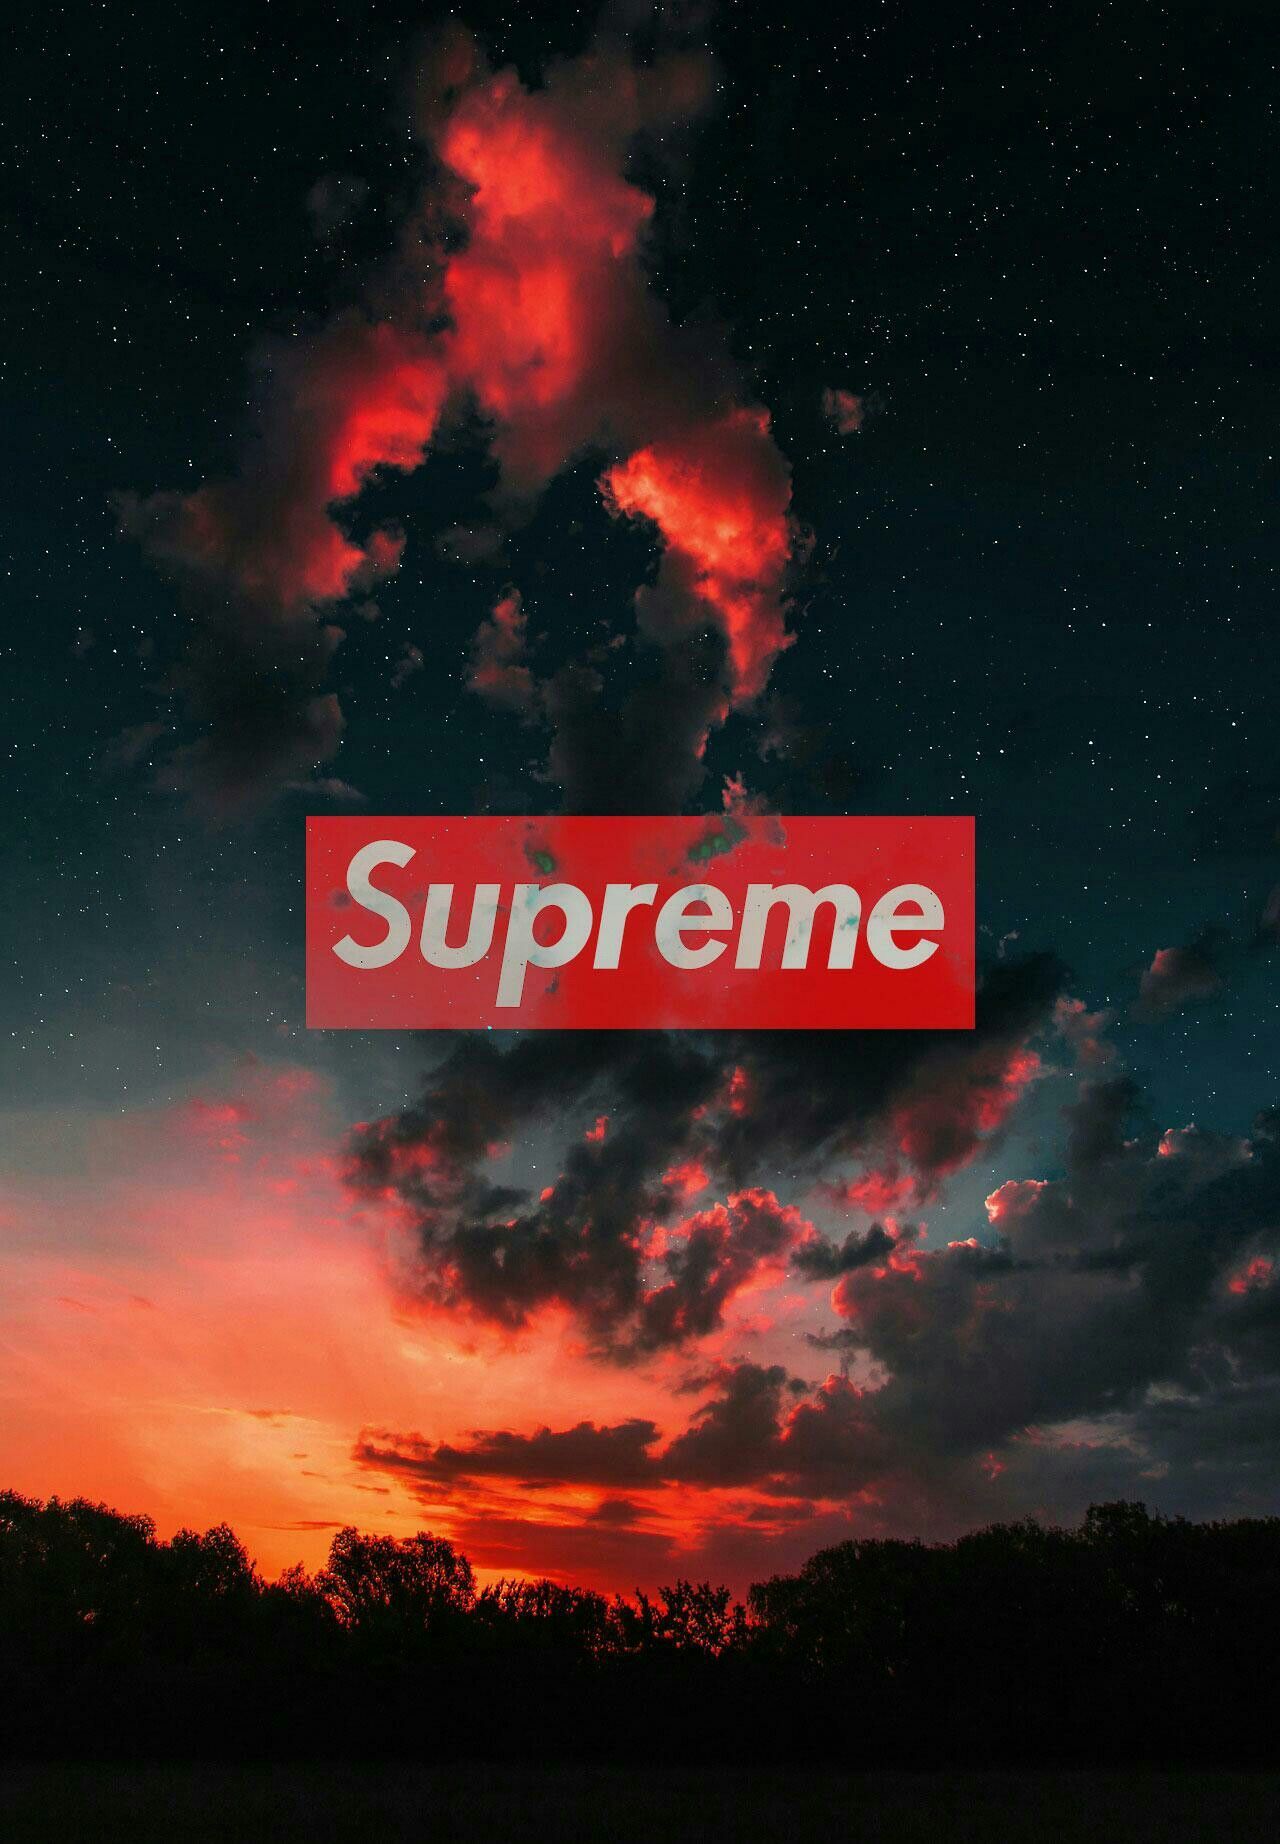 A supreme logo on top of the clouds - Supreme